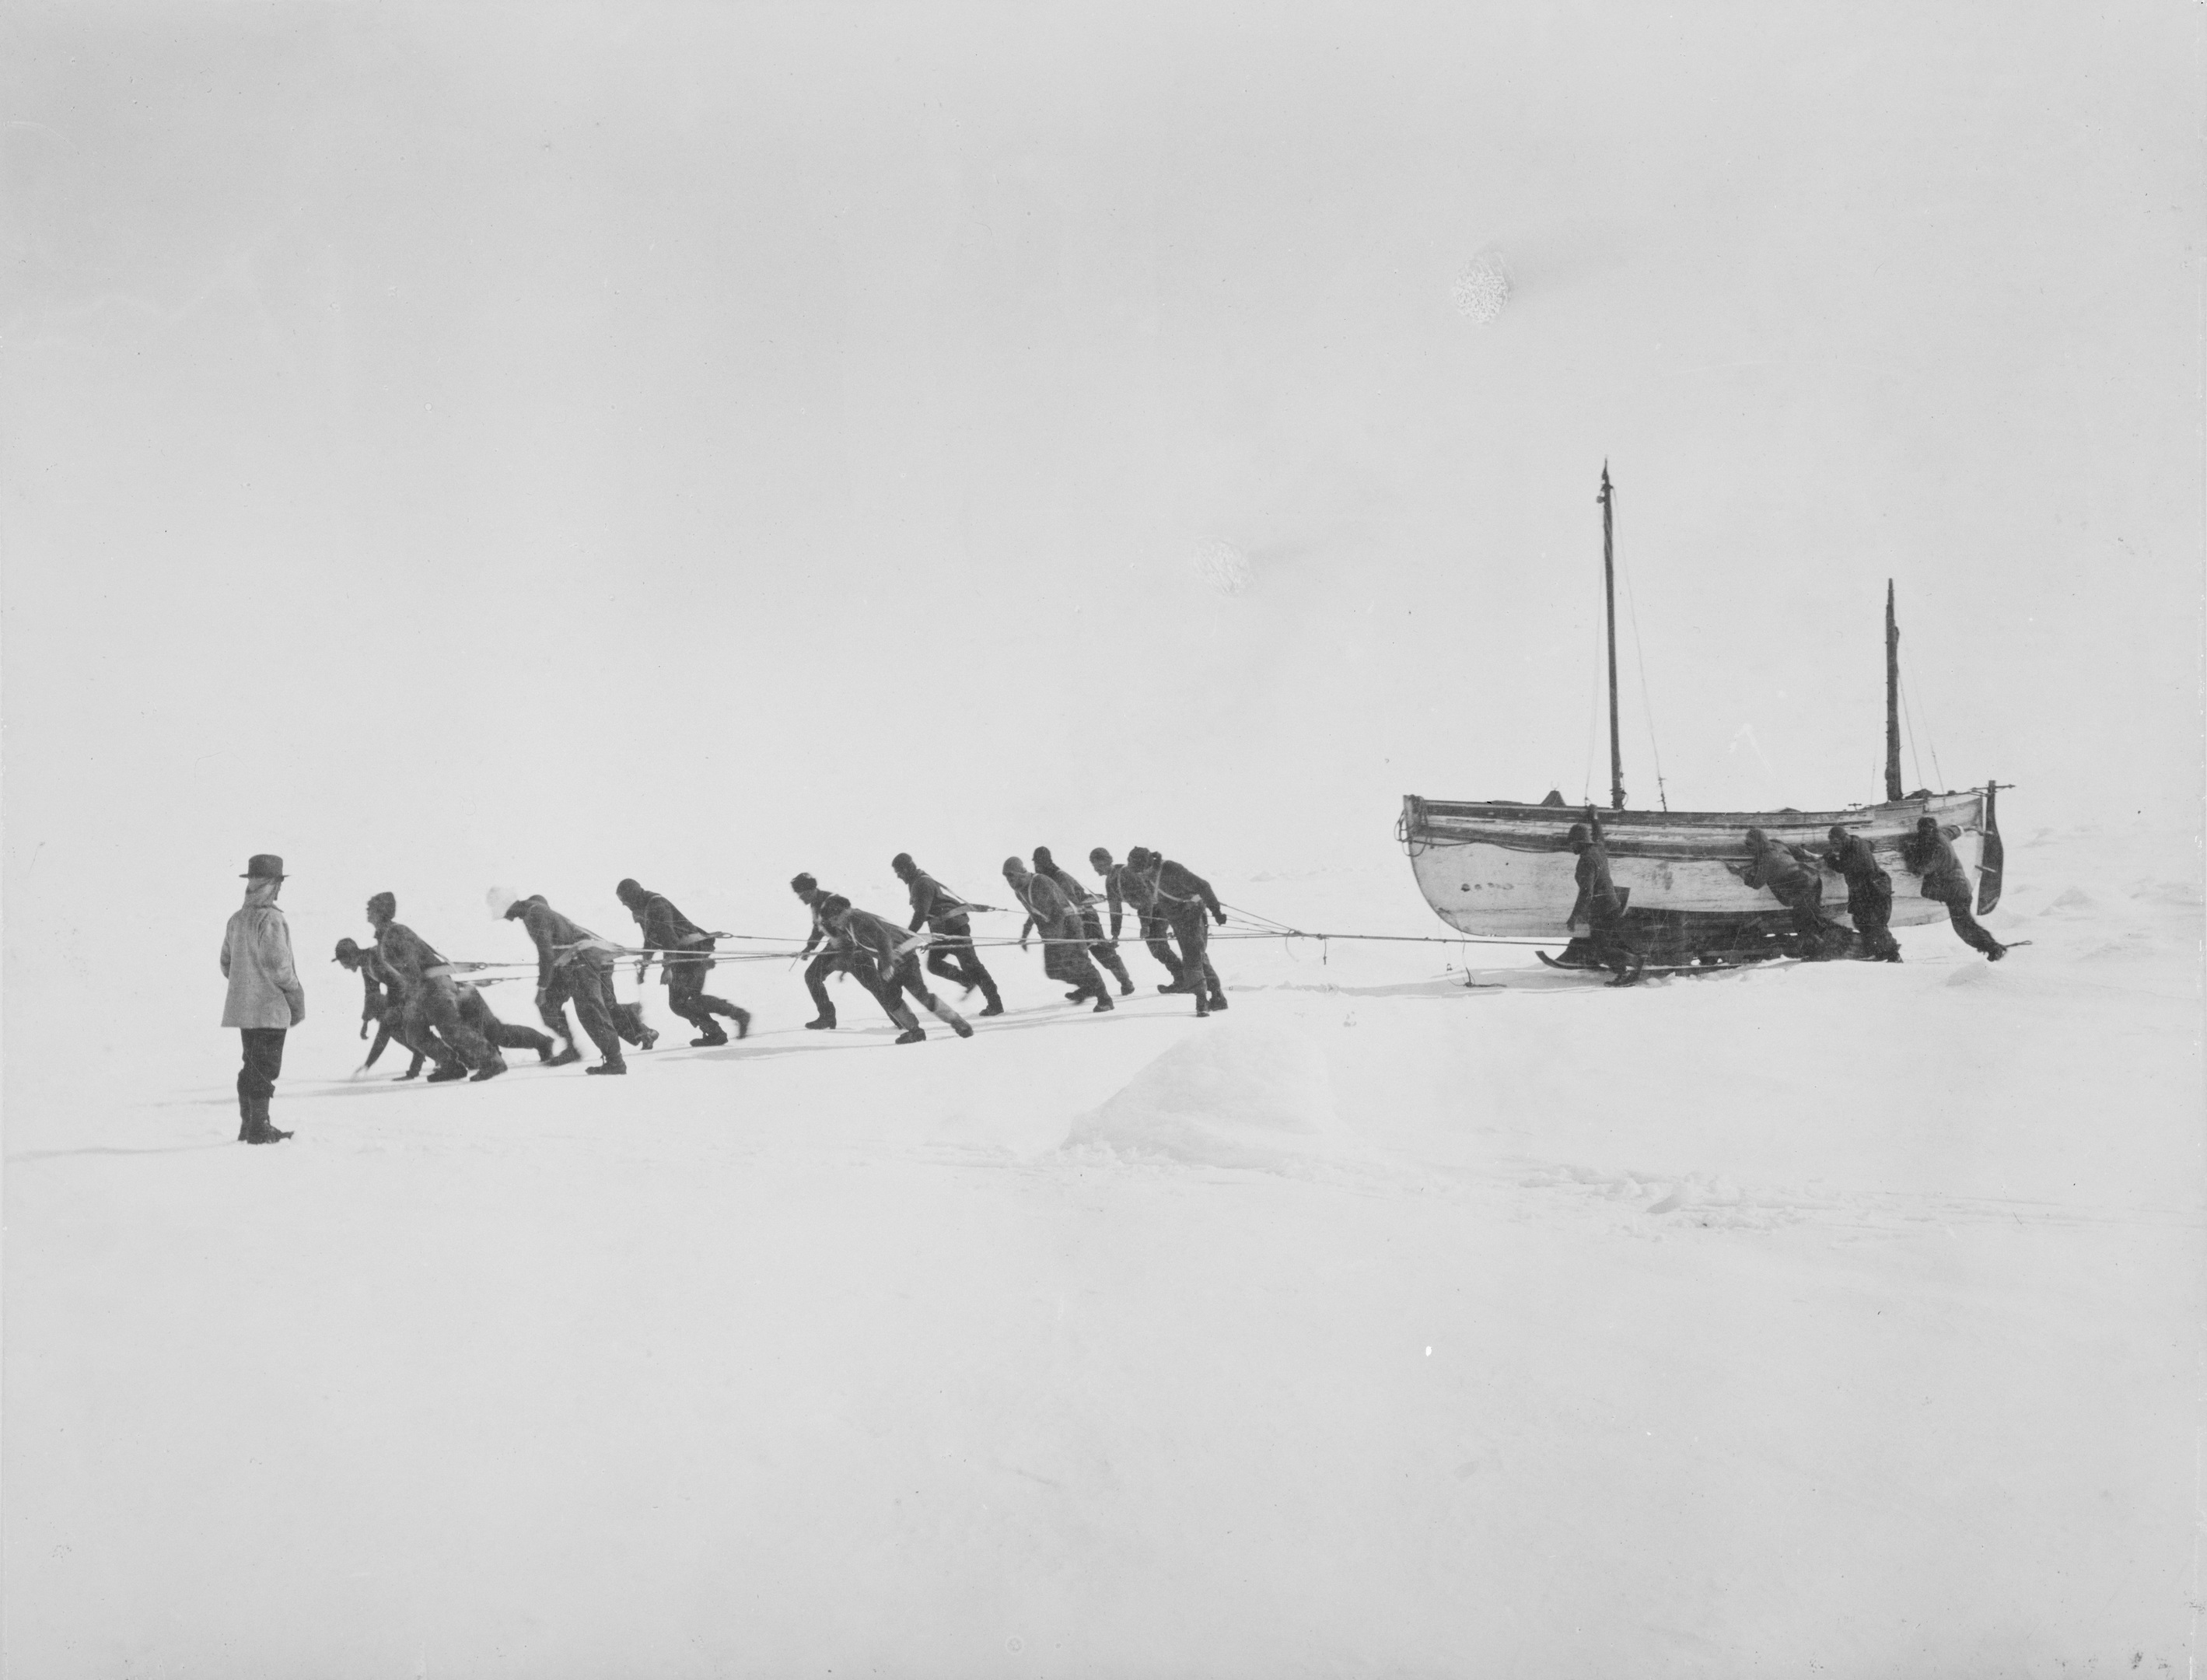 Frank Hurleys pictures of the Ernest Shackleton expedition 1914 to Antarctica.
These are images of the Enduring Eye exhibition at the National Library of Scotland.